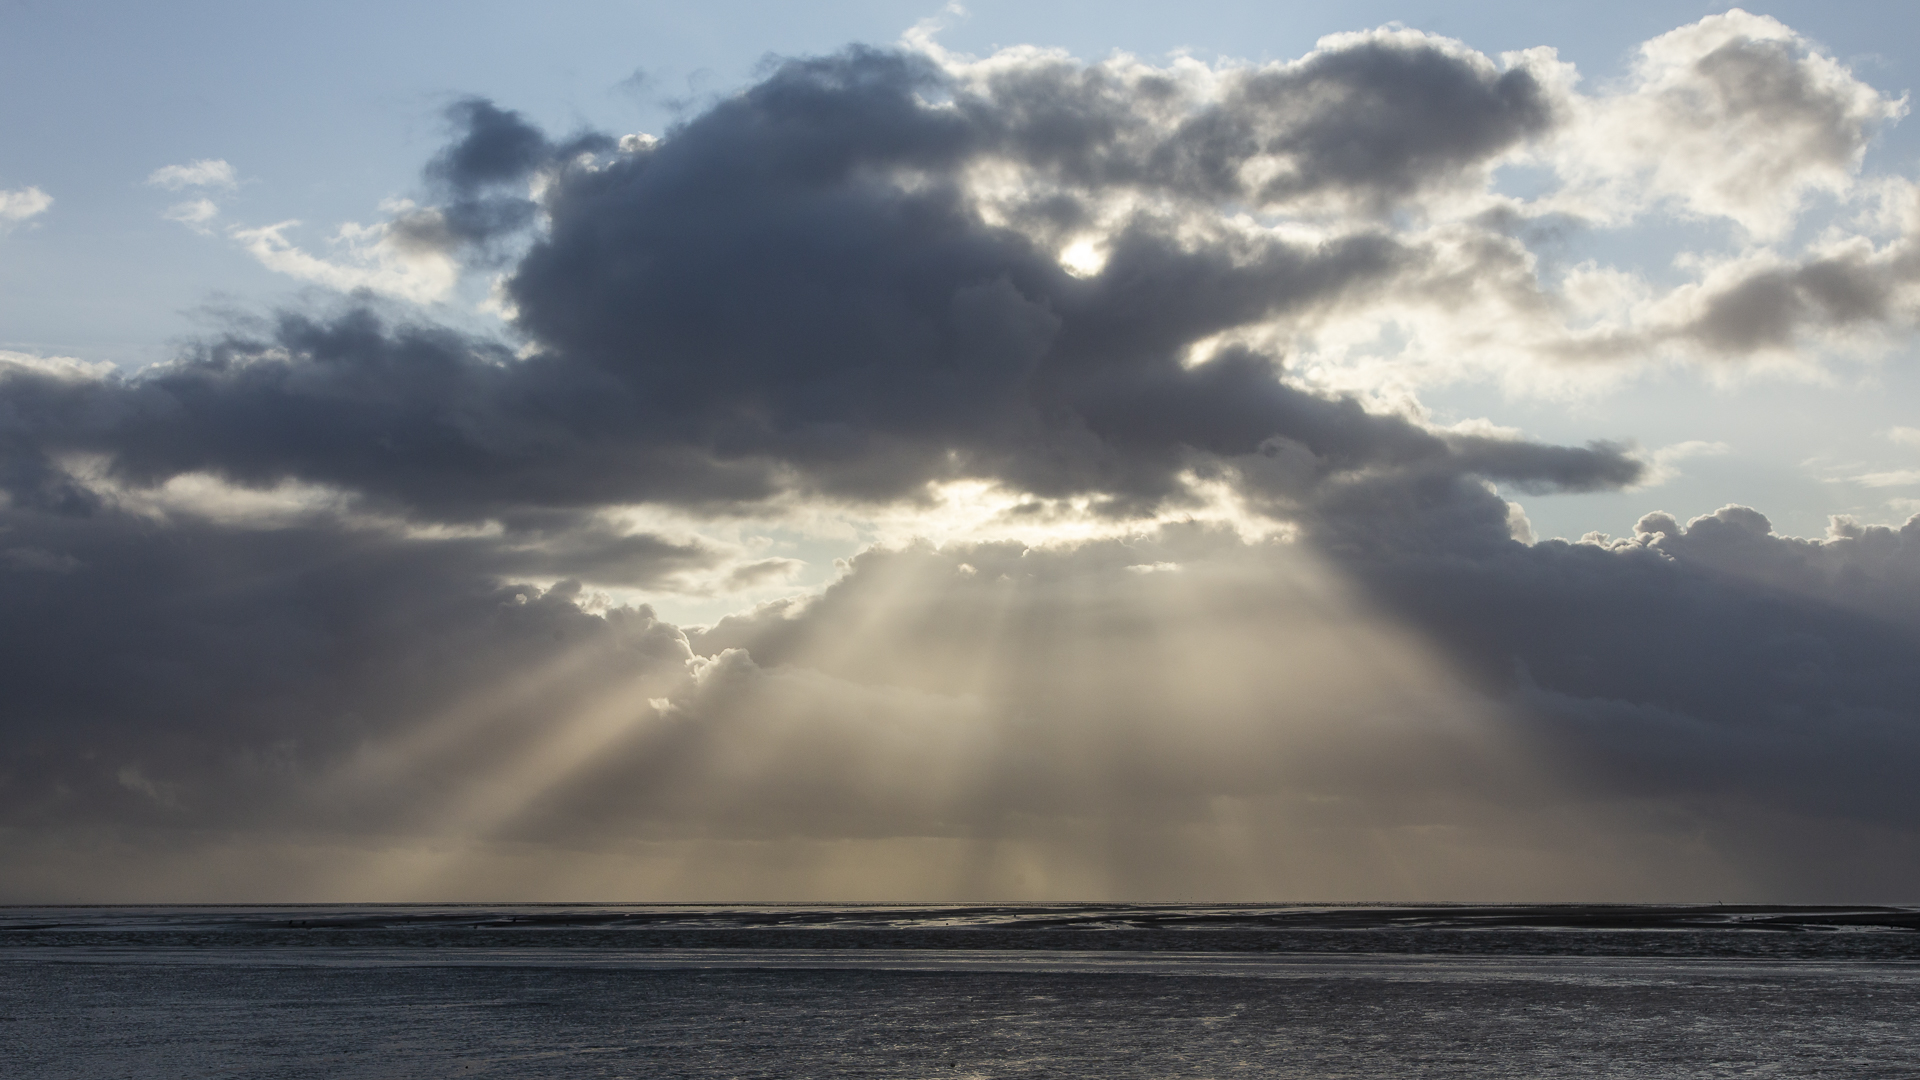 20191010 - St. Peter Ording - IMG_8559